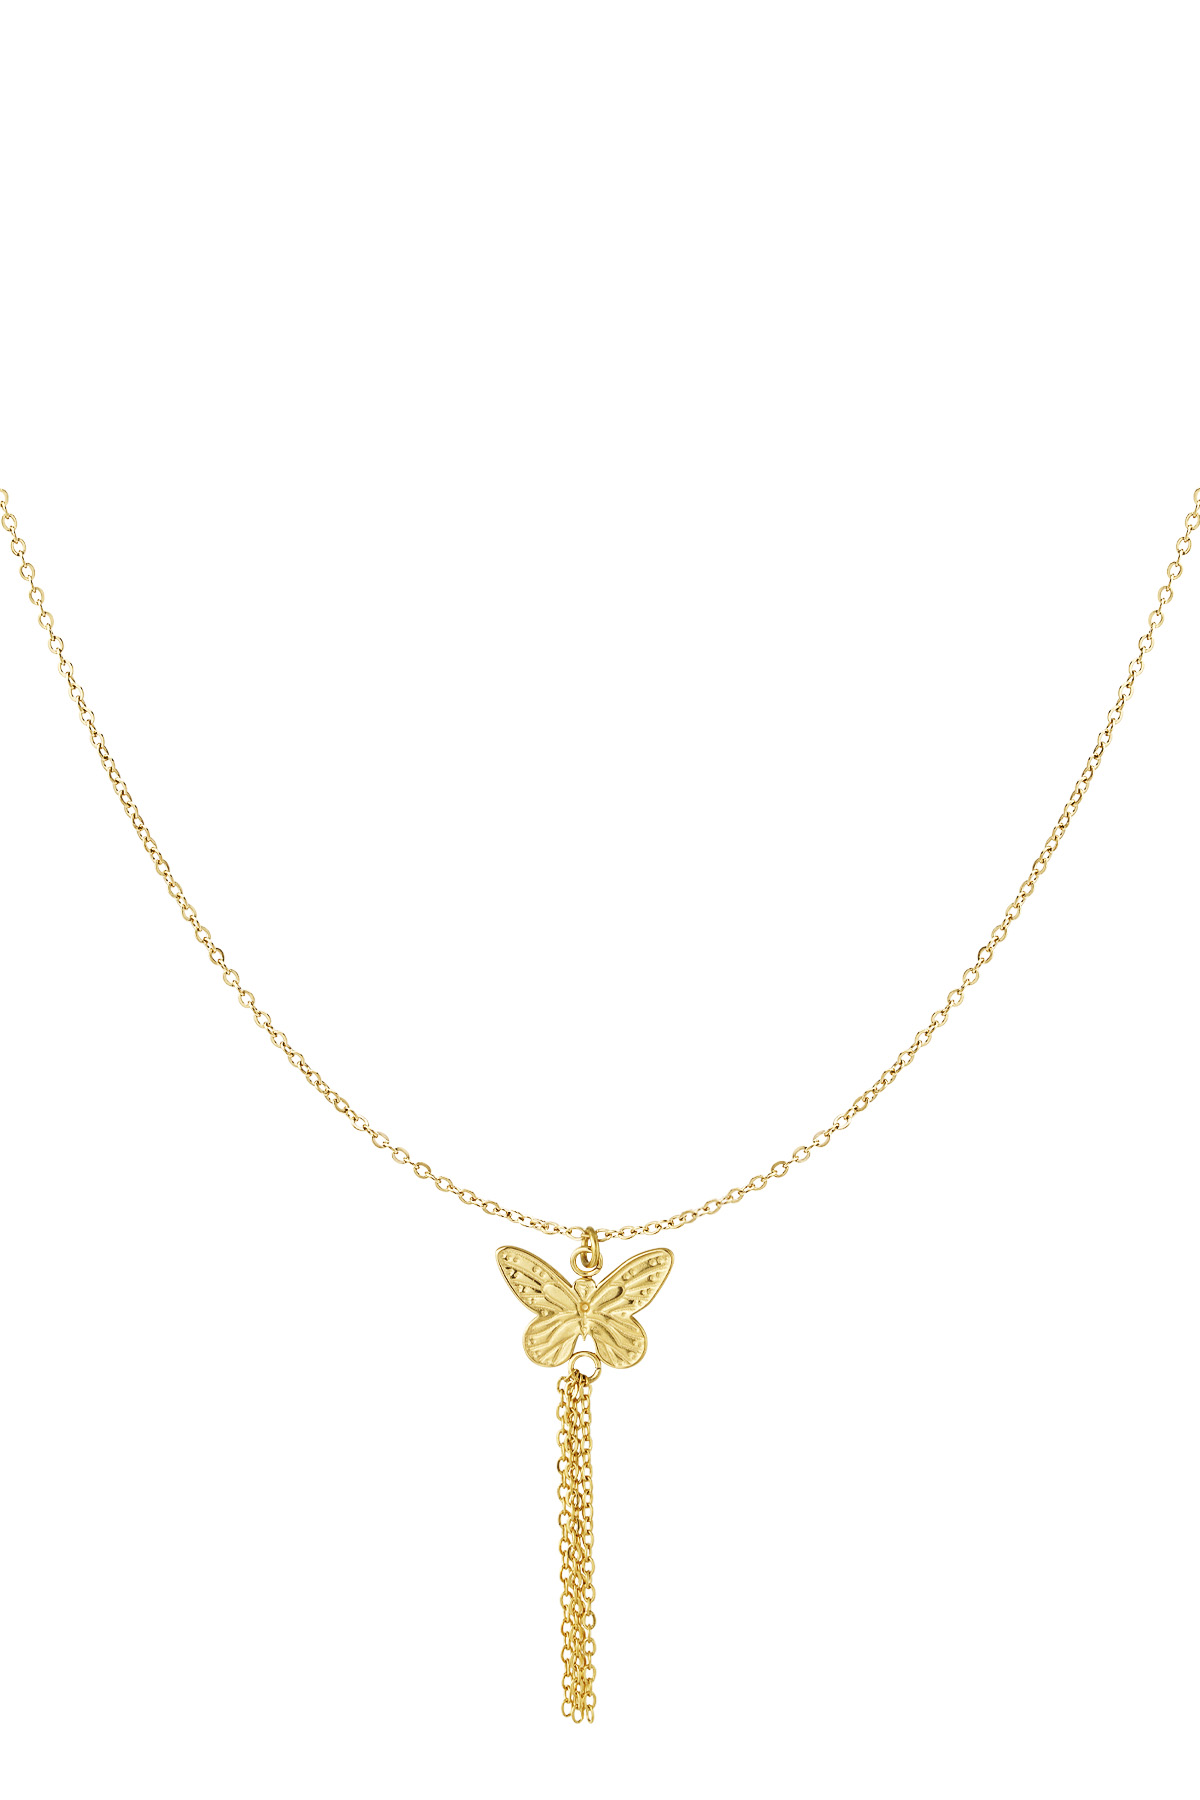 Butterfly necklace with chains - Gold